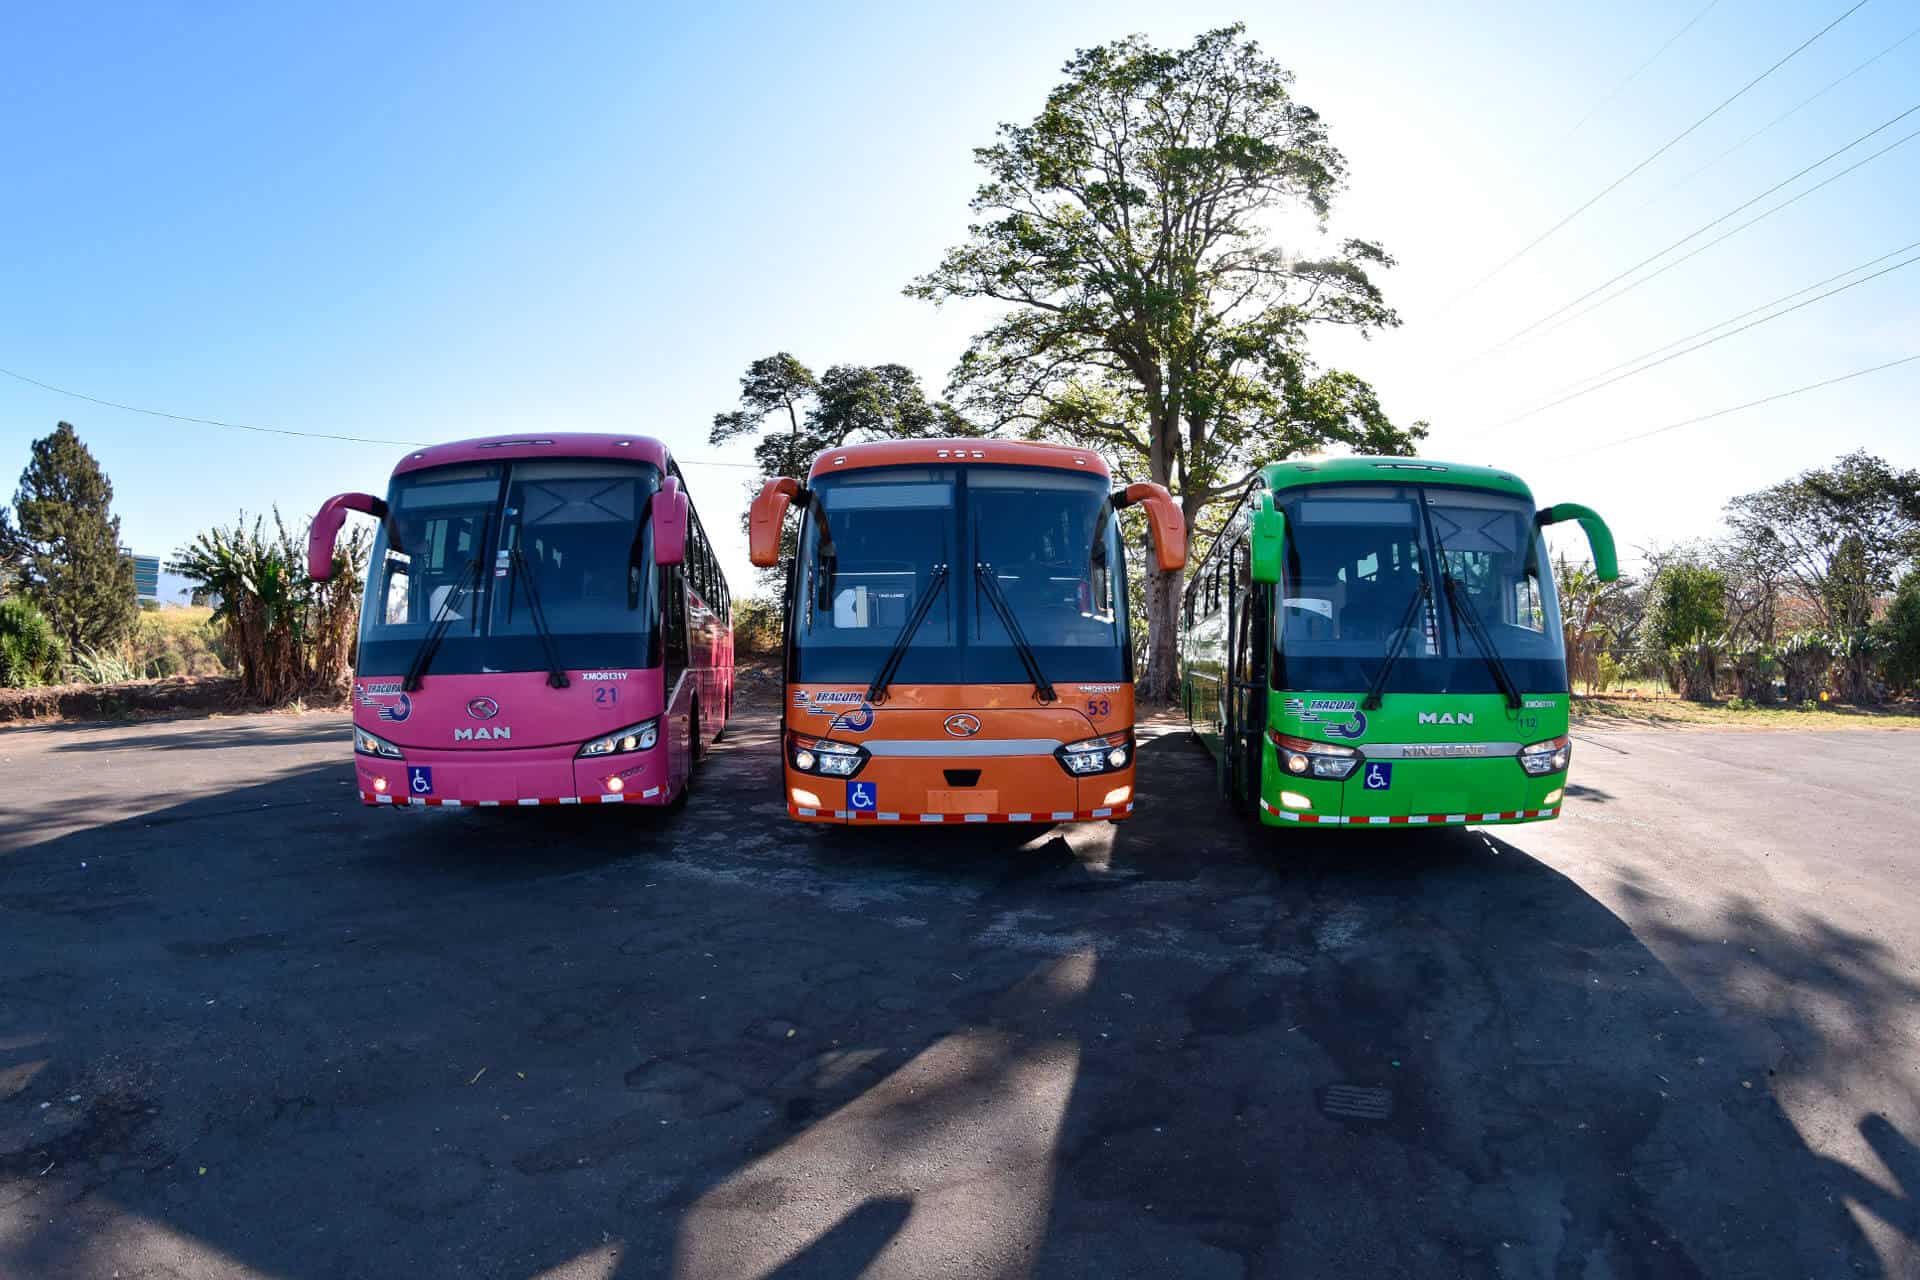 How To Get From Jaco To Uvita – All Possible Ways, Jaco to Uvita, cheapest way from Jaco to Uvita, Jaco to Uvita by bus, bus from Jaco to Uvita, taxi from Jaco to Uvita, Uber from Jaco to Uvita, private transfer from Jaco to Uvita, Shared Van Jaco to Uvita, rent a car at Uvita